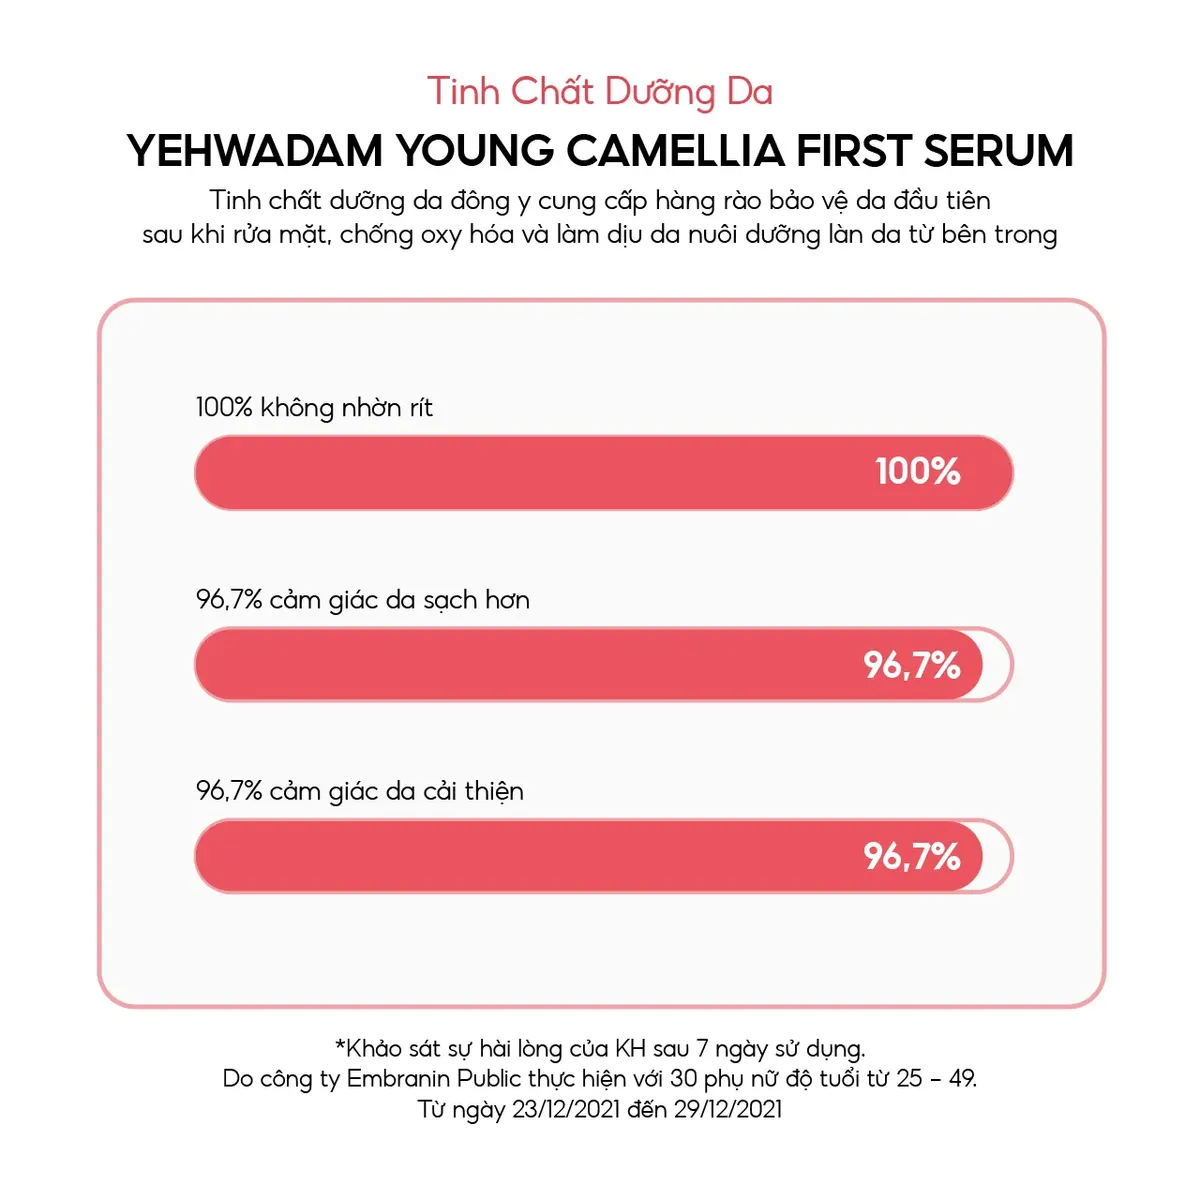 tinh-chat-duong-da-yehwadam-young-camellia-first-serum-180ml-7